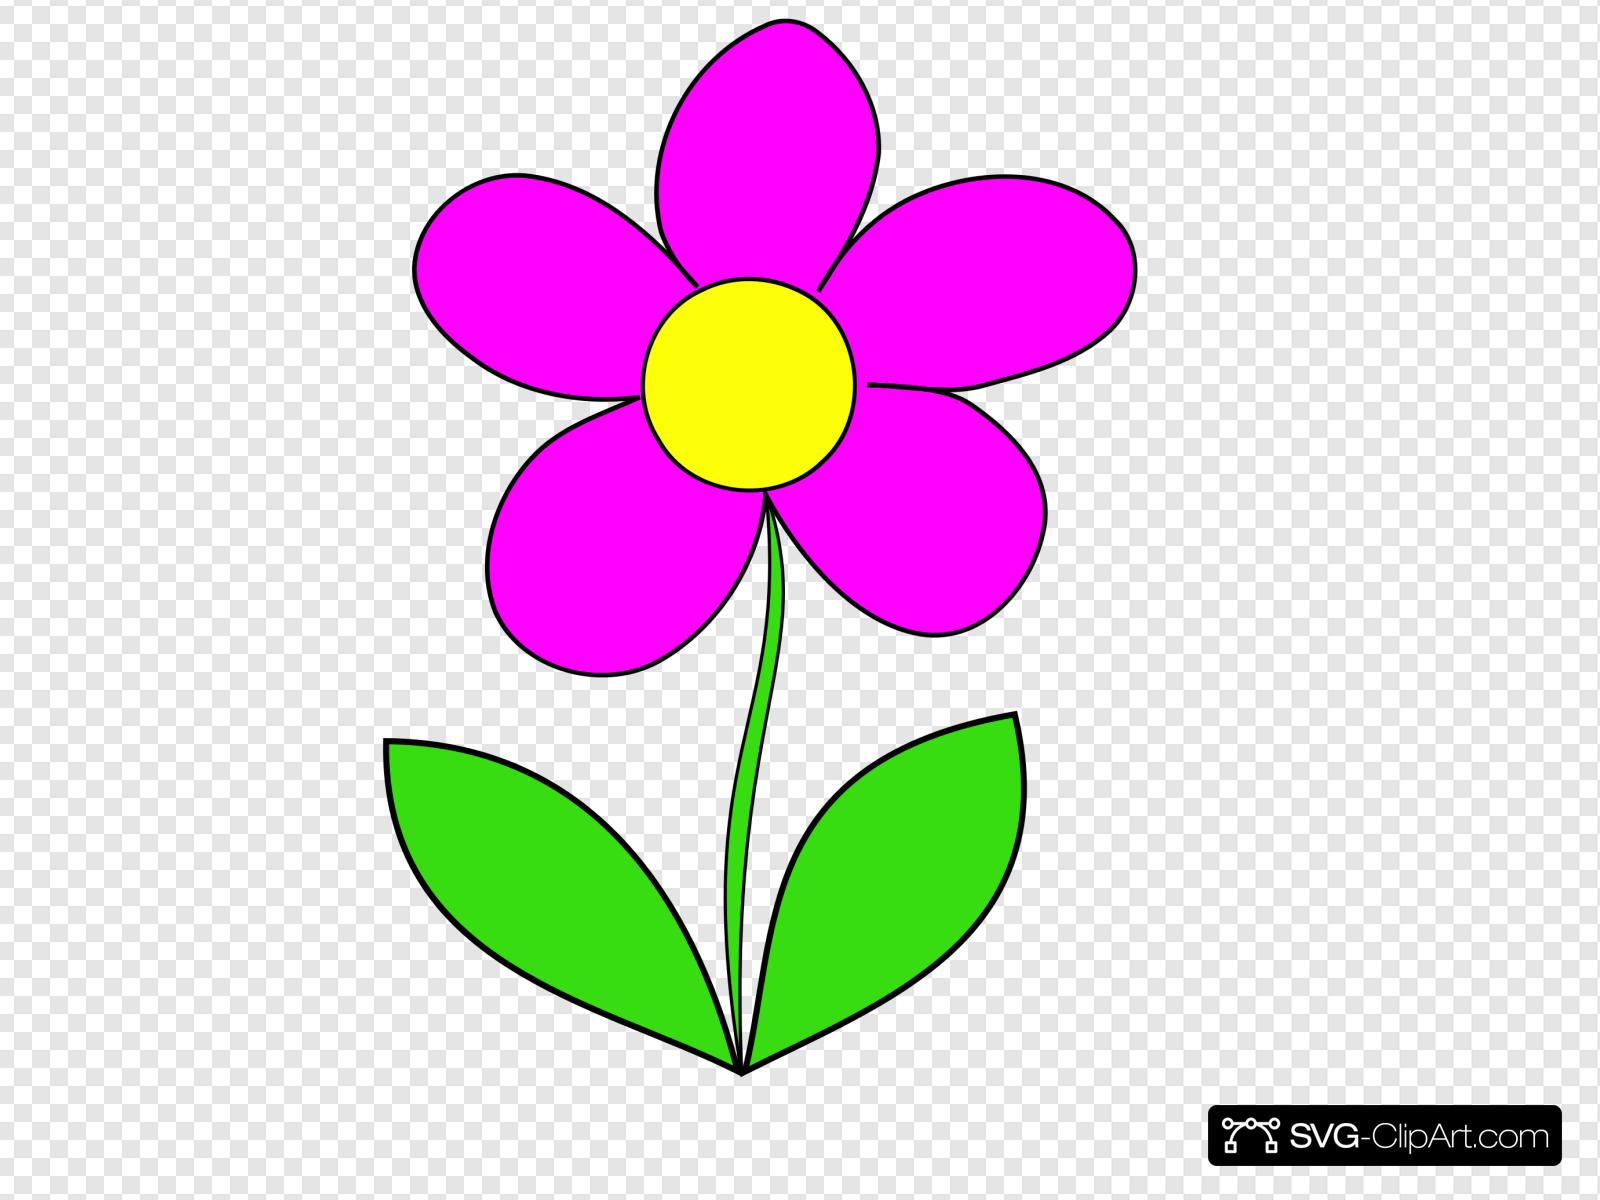 Pink Flower Clip art, Icon and SVG